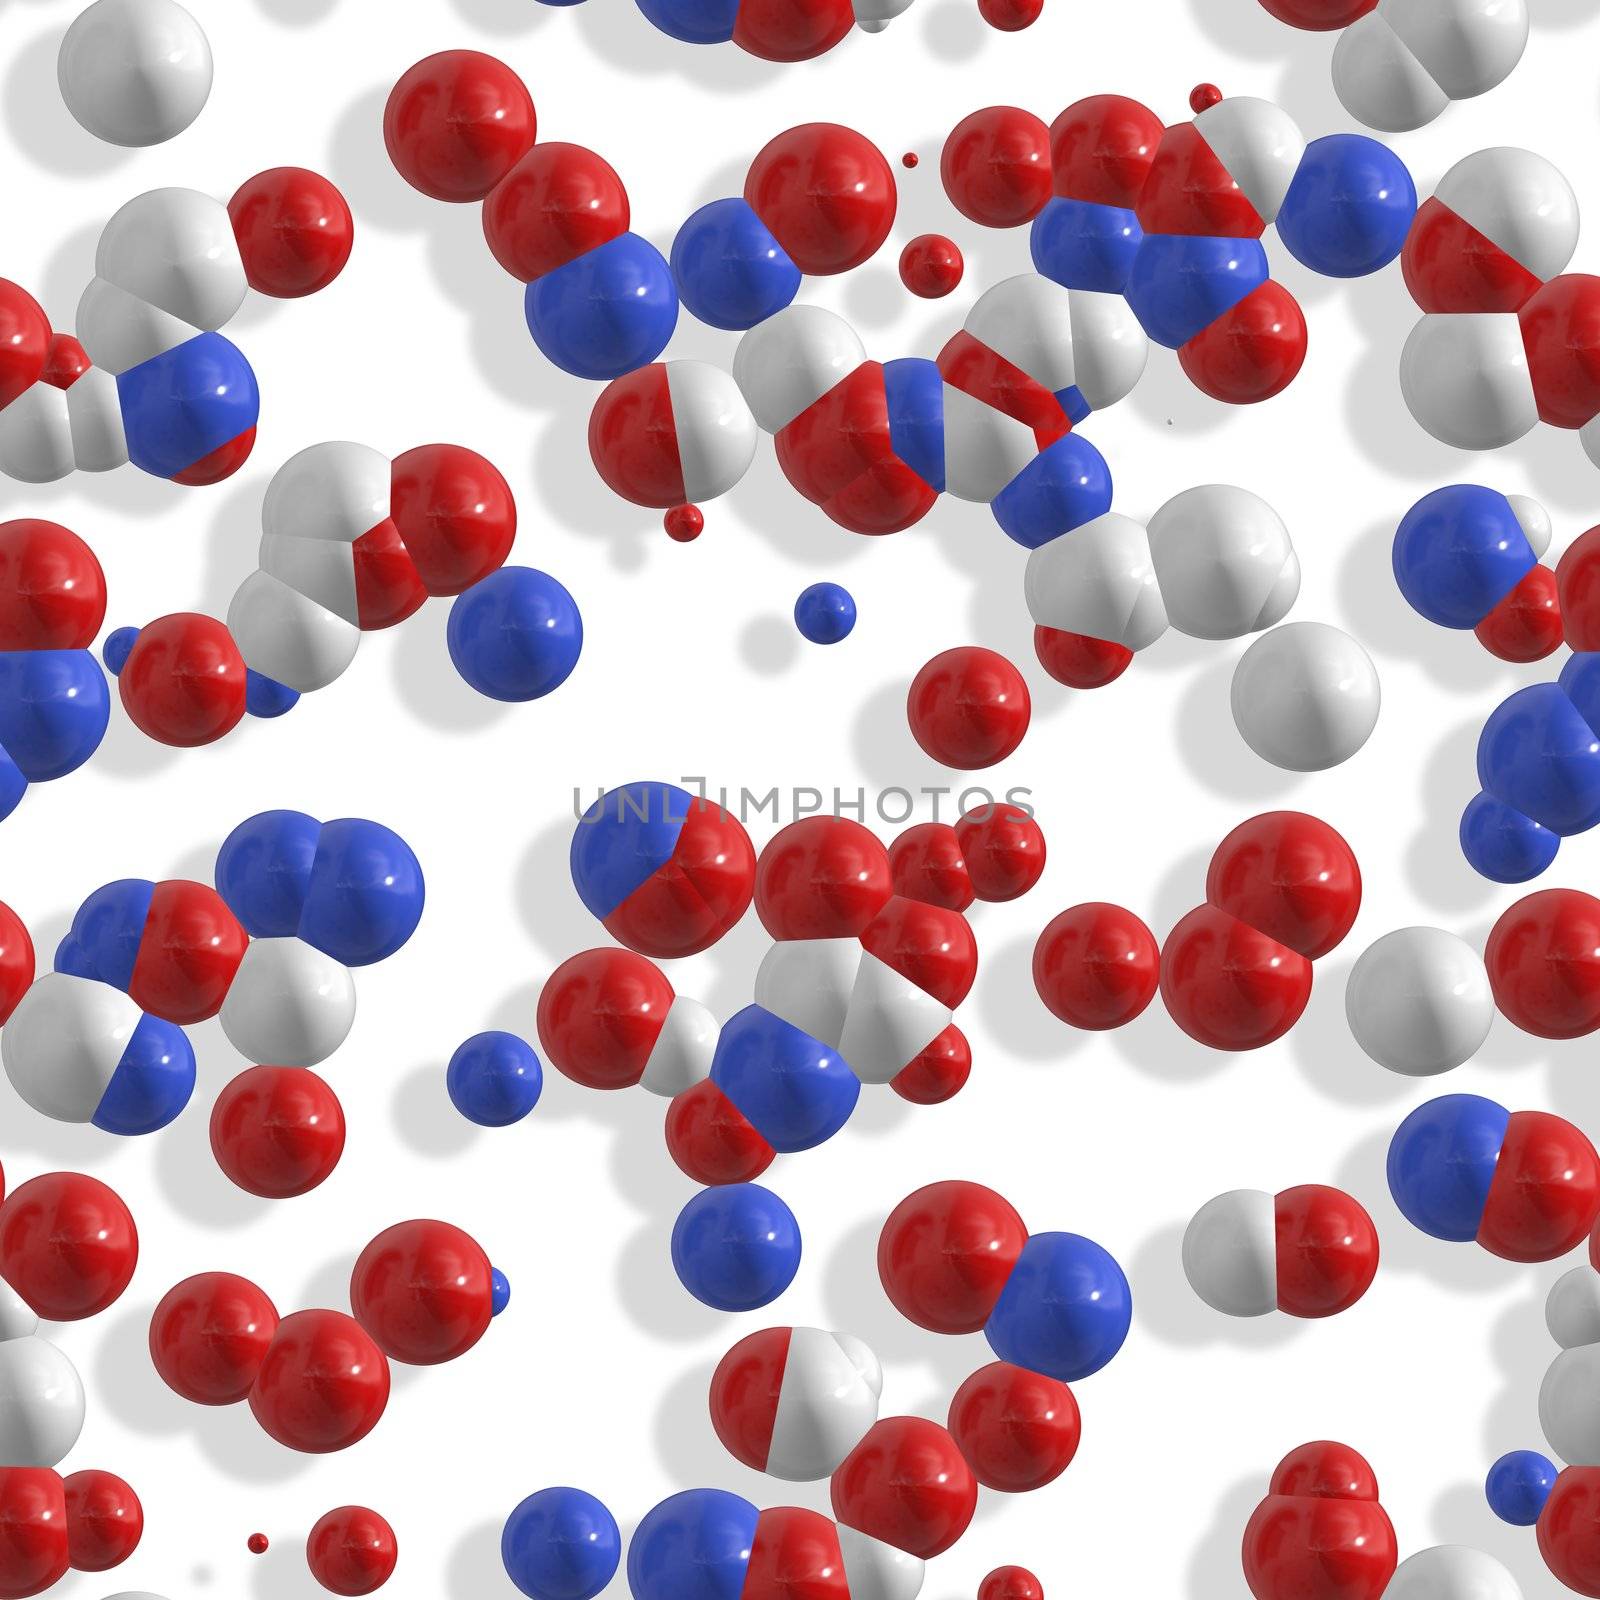 red white and blue representation of atoms and molecules